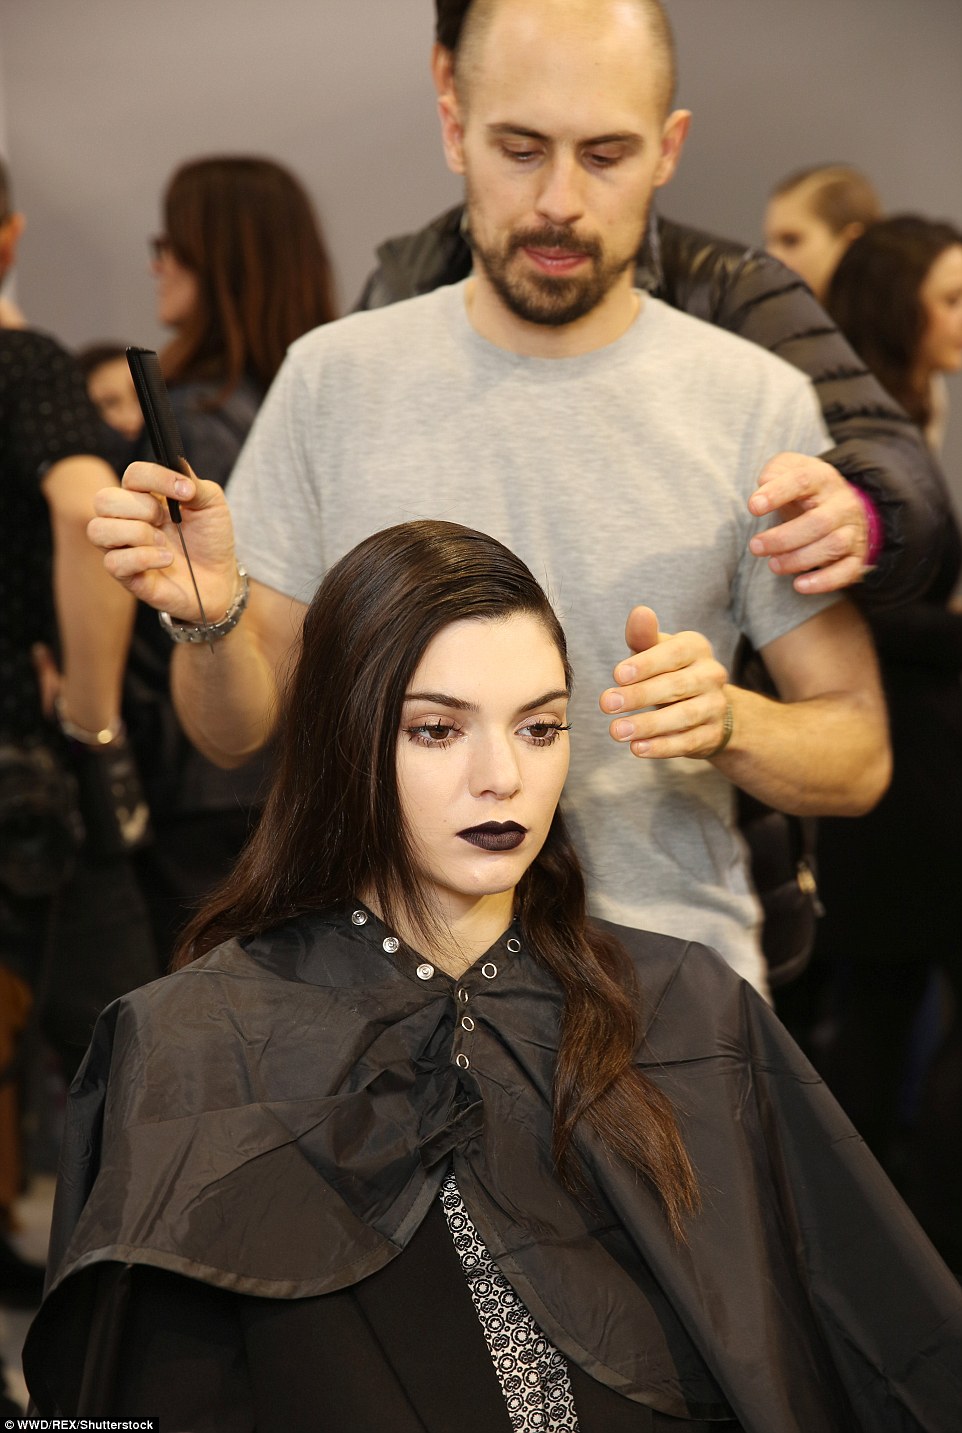 Finishing touches: Kendall was pictured in hair and makeup backstage, with her black lips looking dramatic against her pale skin, while a stylist got to work slicking back her locks